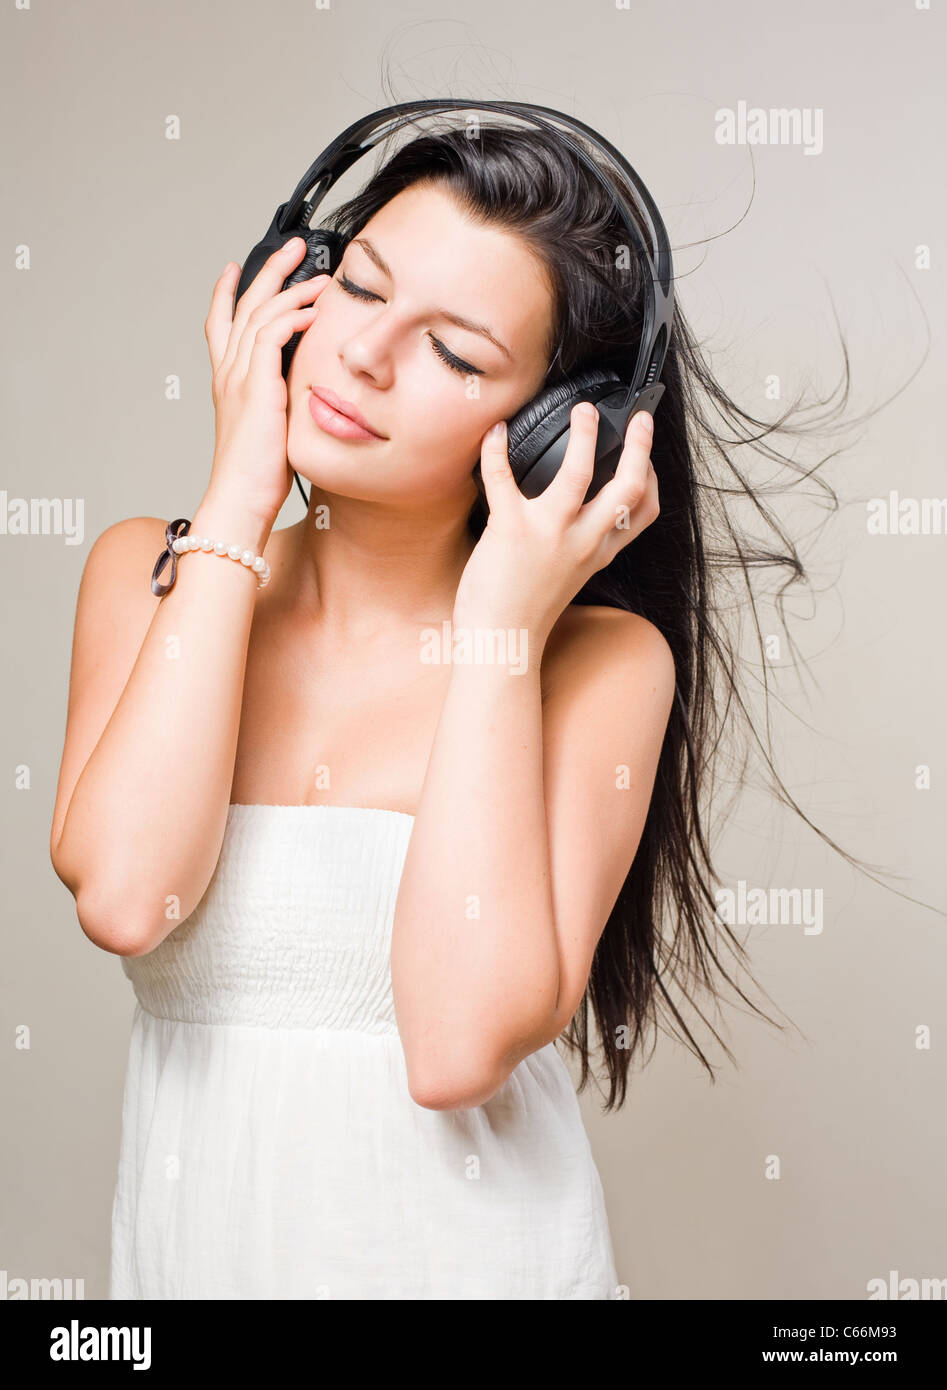 Gorgeous young brunette immersed in music wearing headphones. Stock Photo